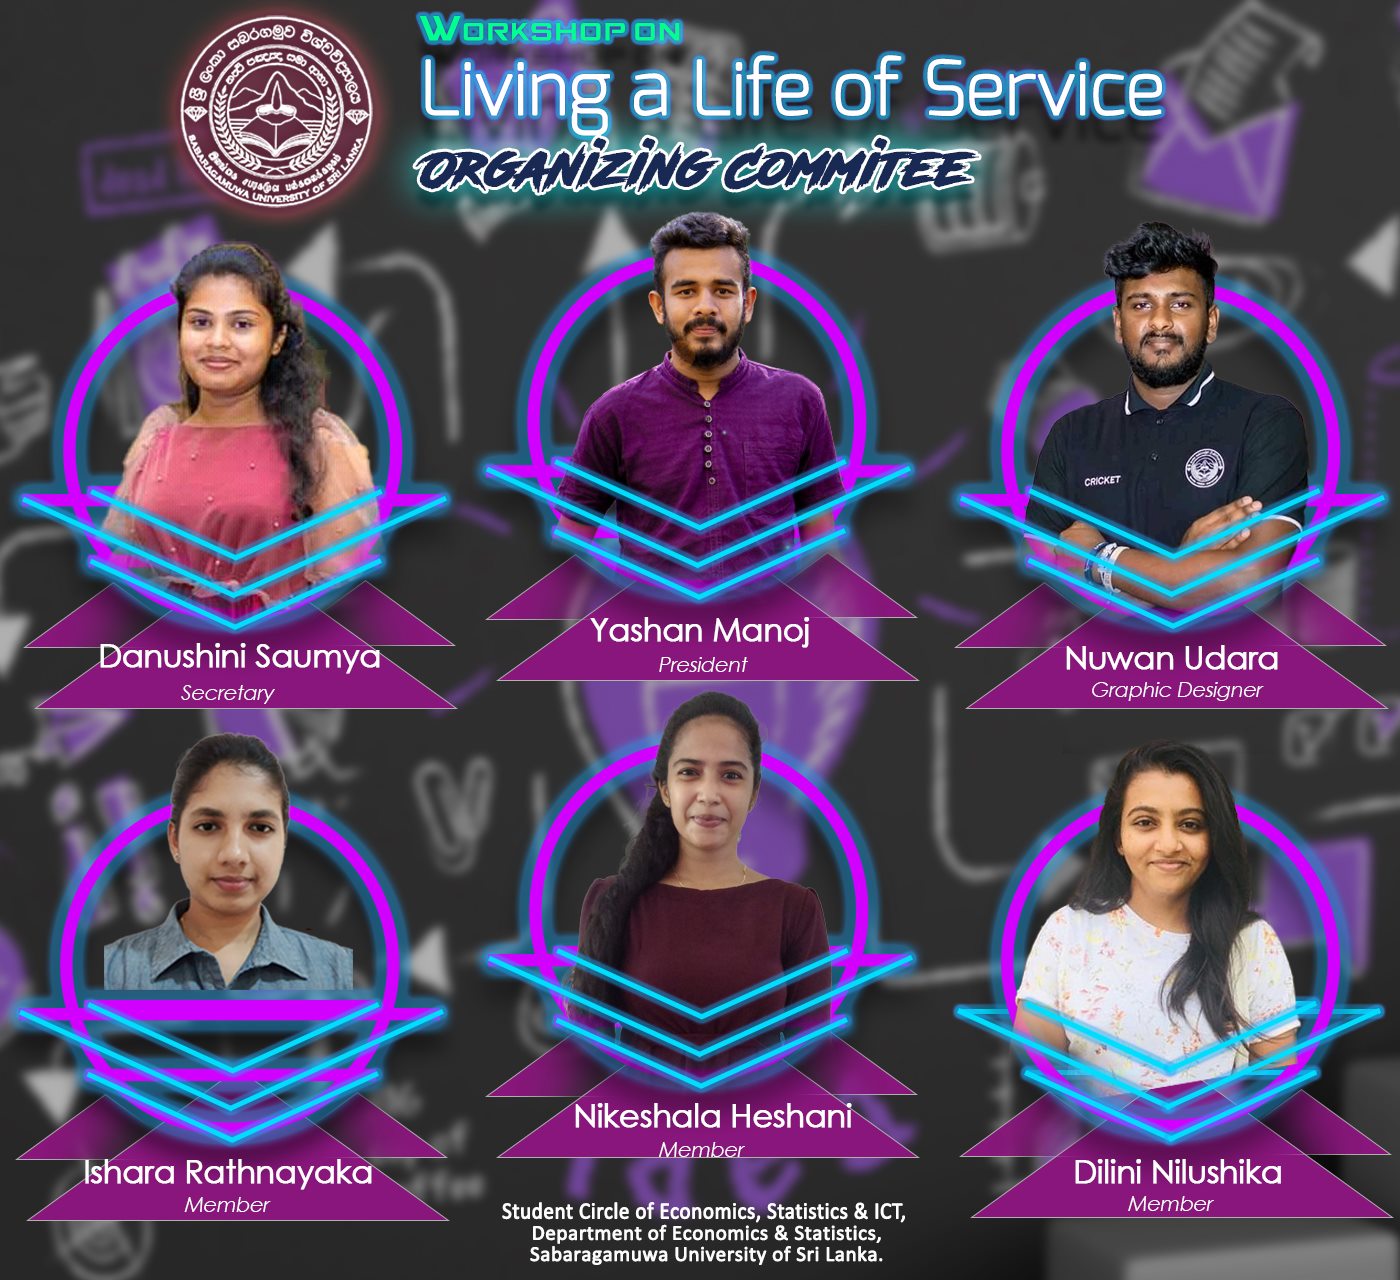 Workshop on LIVING A LIFE OF SERVICE organizing members